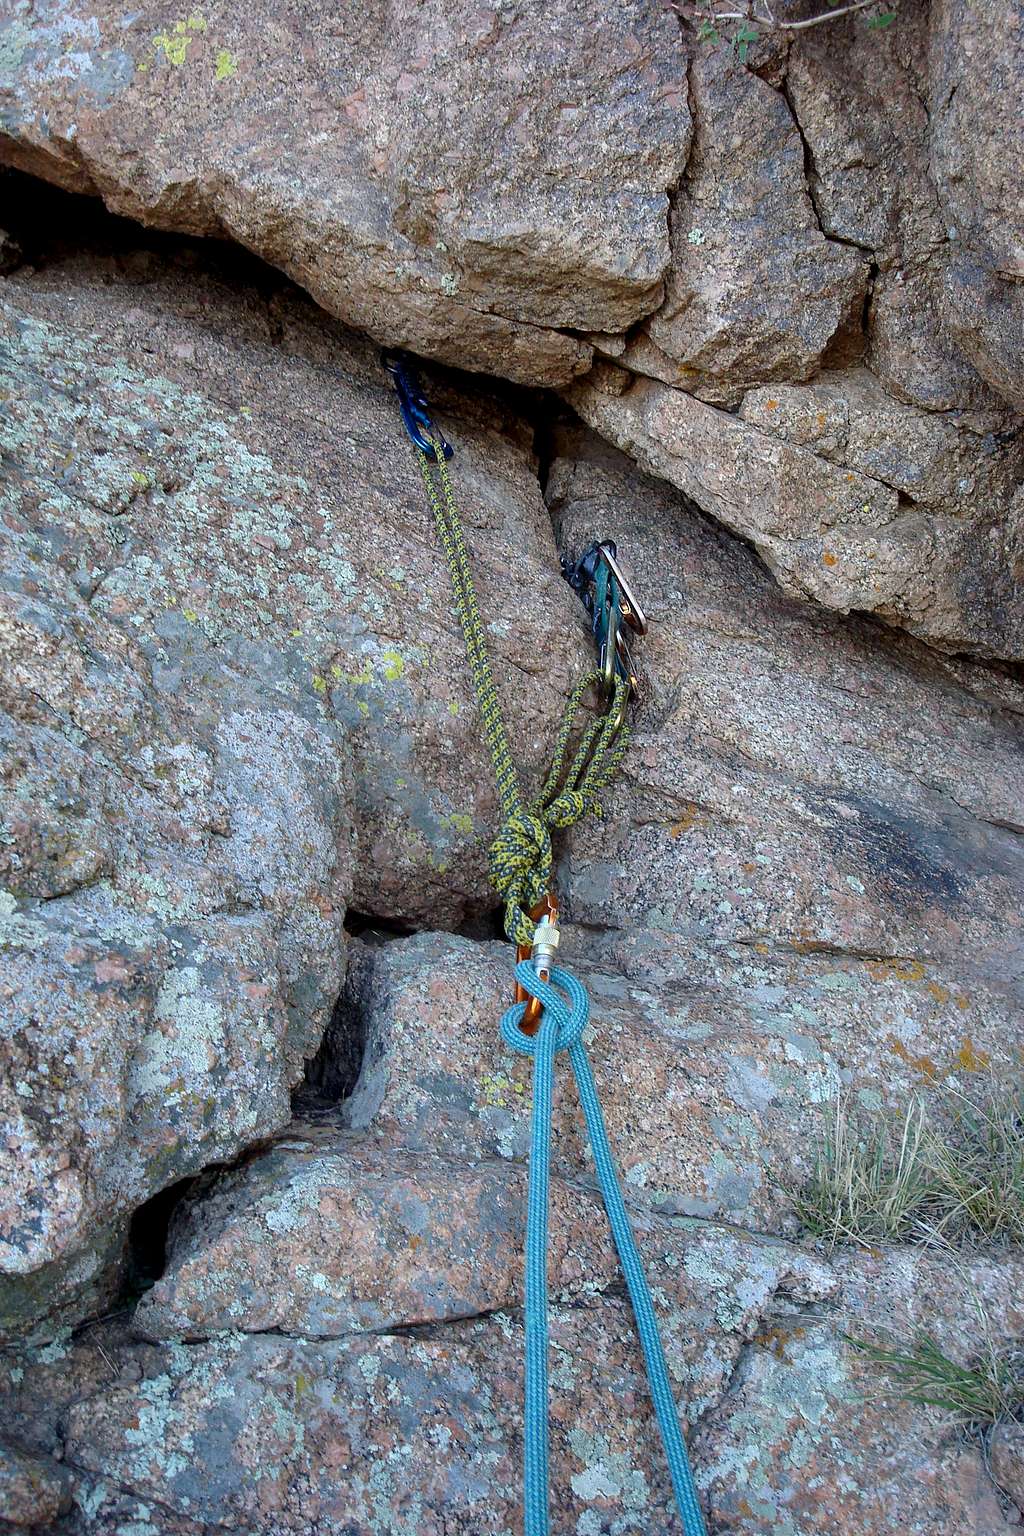 1st belay station, the Thumb